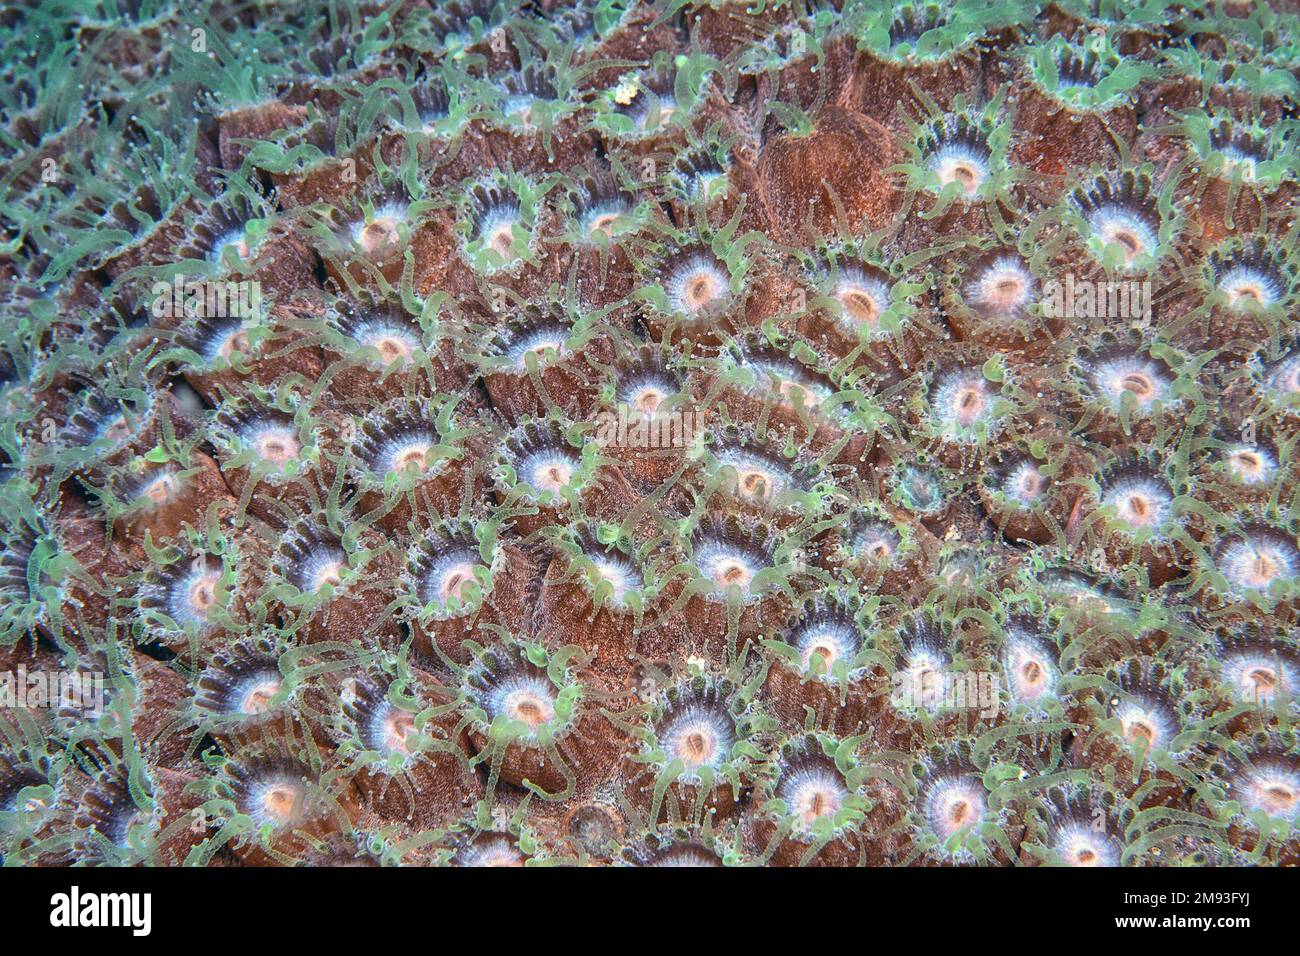 Astreopora is a genus of stony corals in the Acroporidae family. Members of the genus are commonly known as star corals, open polyp at night Stock Photo